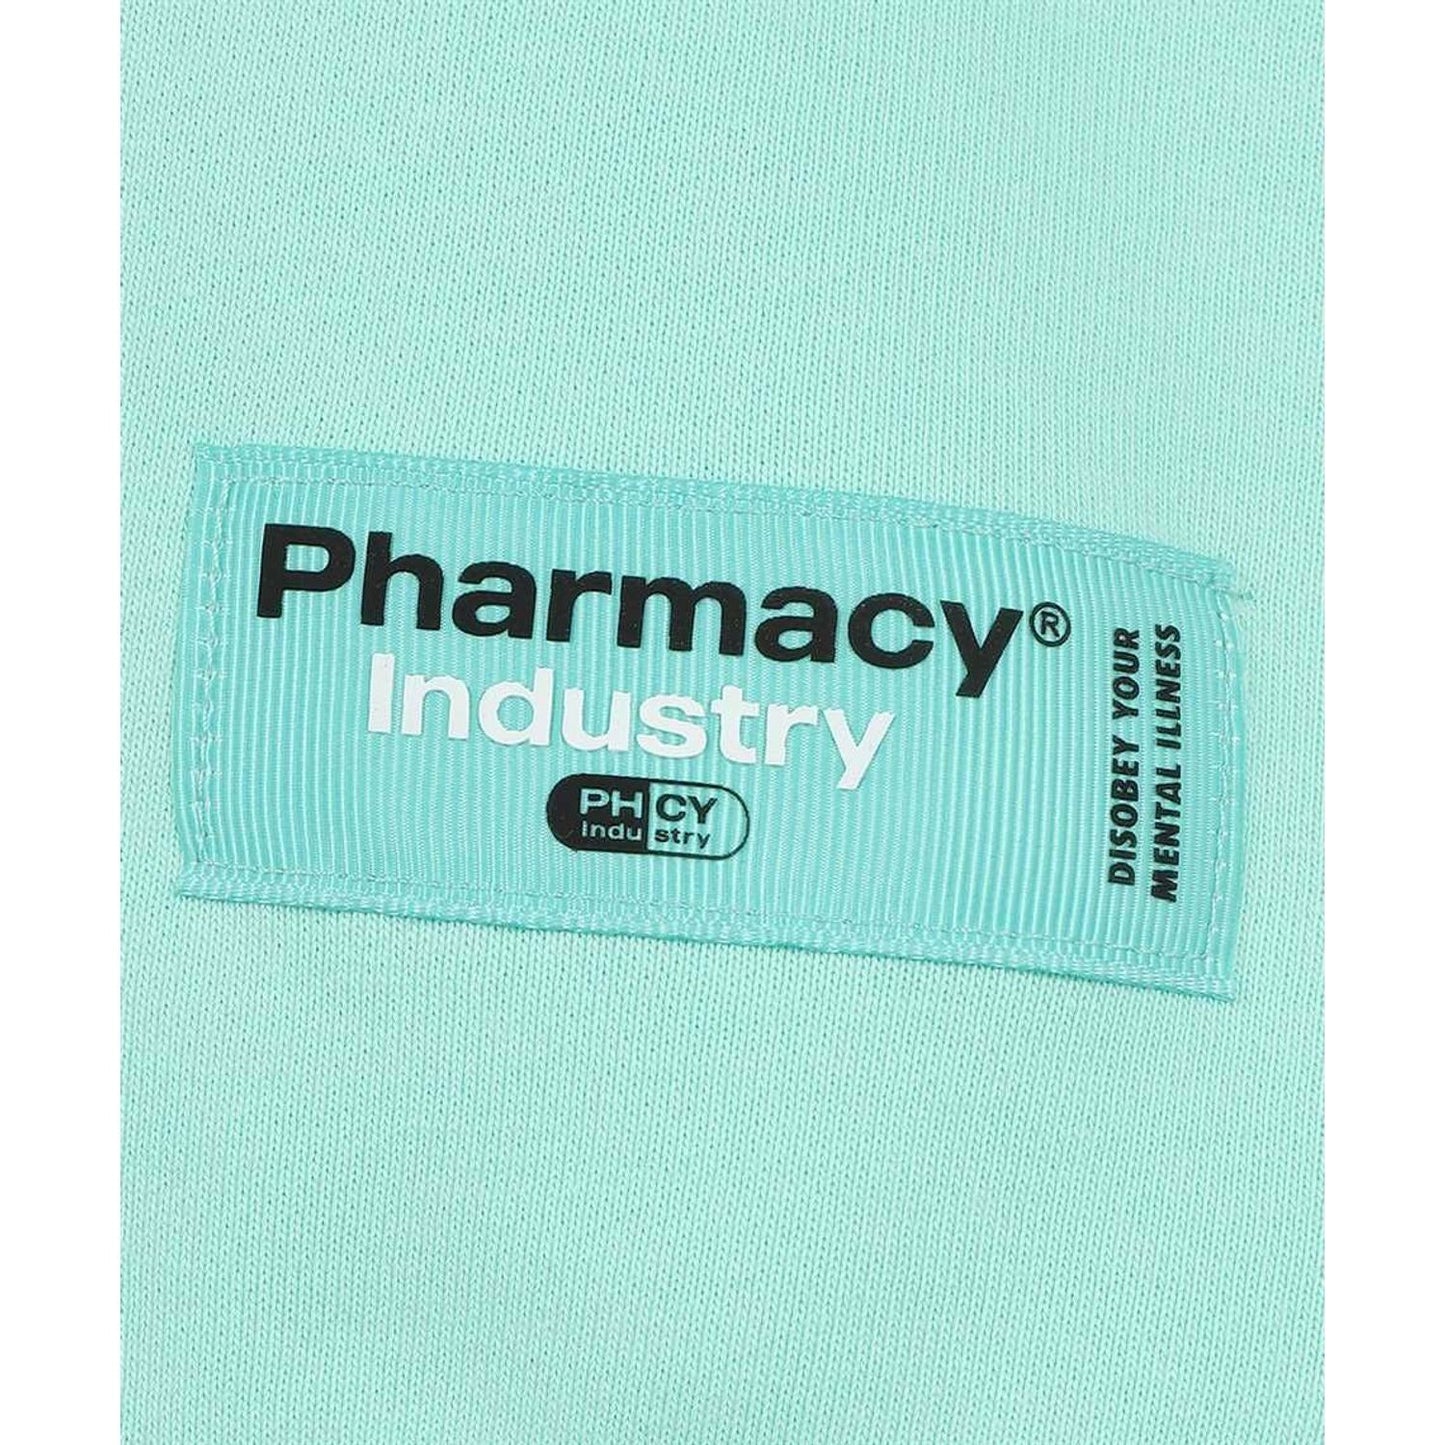 Pharmacy Industry Chic Urban Hooded Green Sweater with Zip Closure green-cotton-sweater-4 product-8565-1900944828-51316ada-4d2.jpg